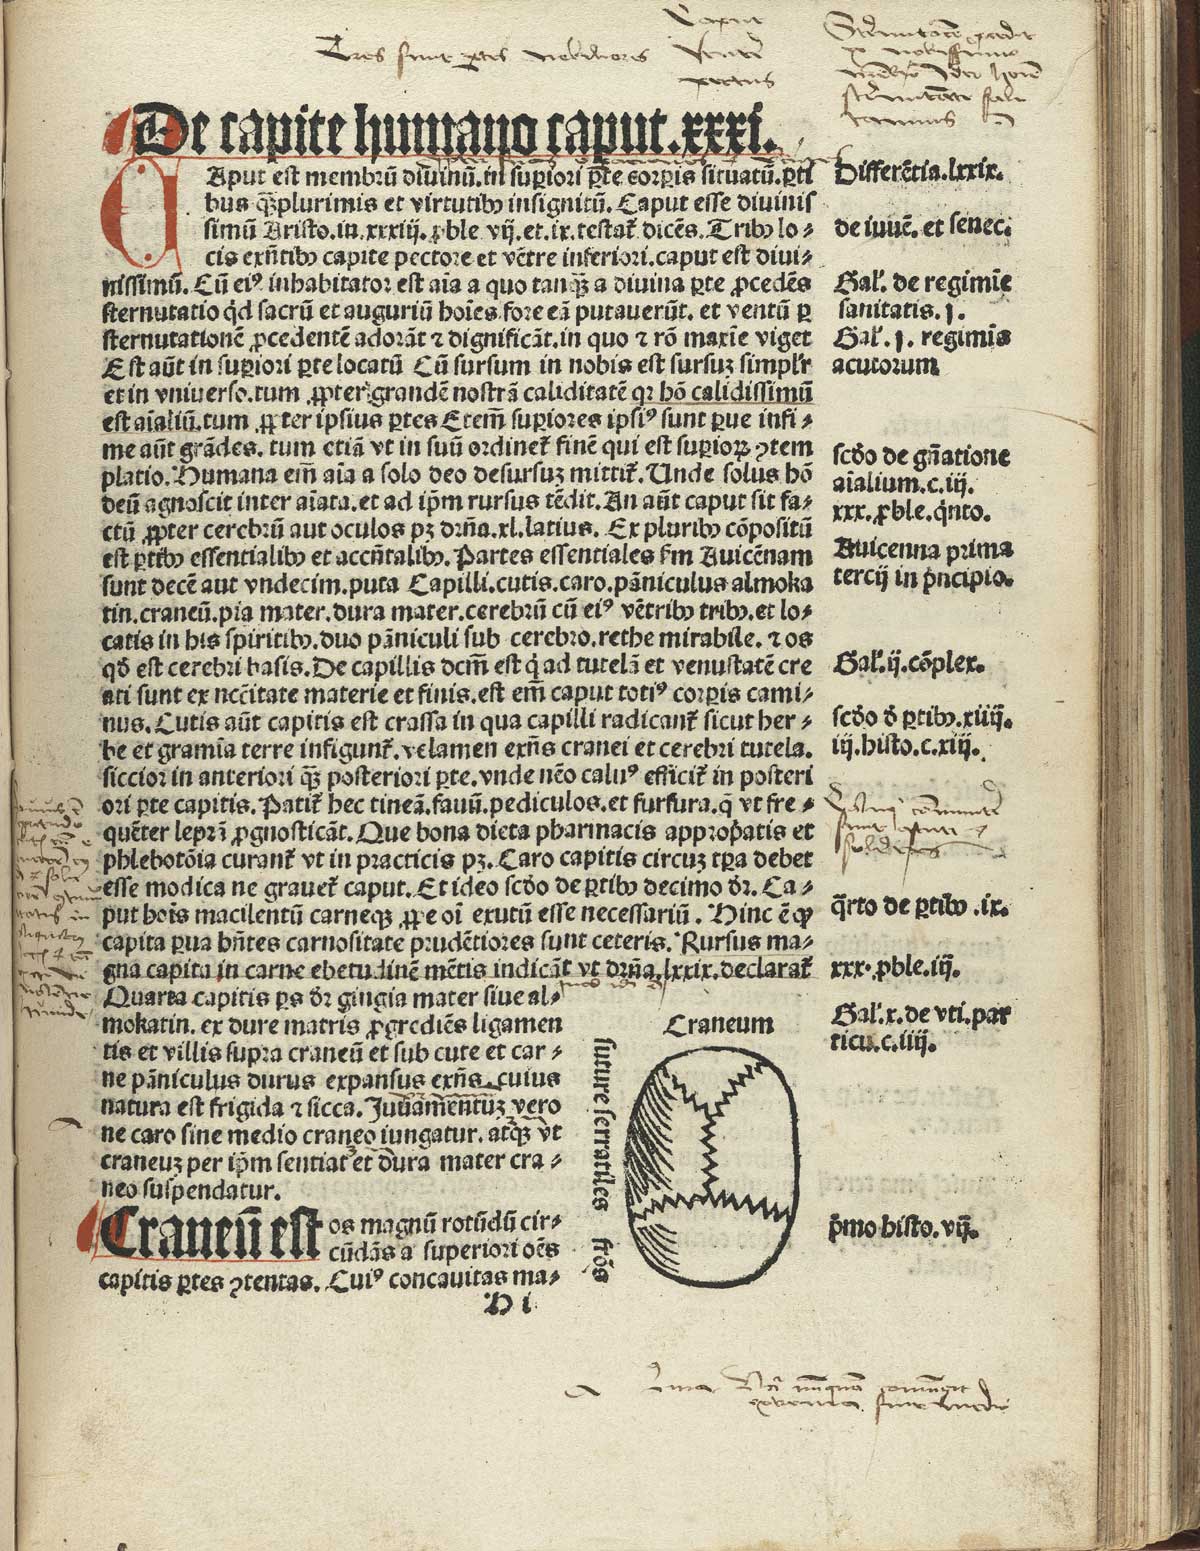 Page 81 of Magnus Hundt's Antropologium de hominis dignitate, natura et proprietatibus, de elementis, partibus et membris humani corporis, featuring the overhead view of the top of a cranium in the bottom right corner of the page as well as handwritten commentary in the margins.